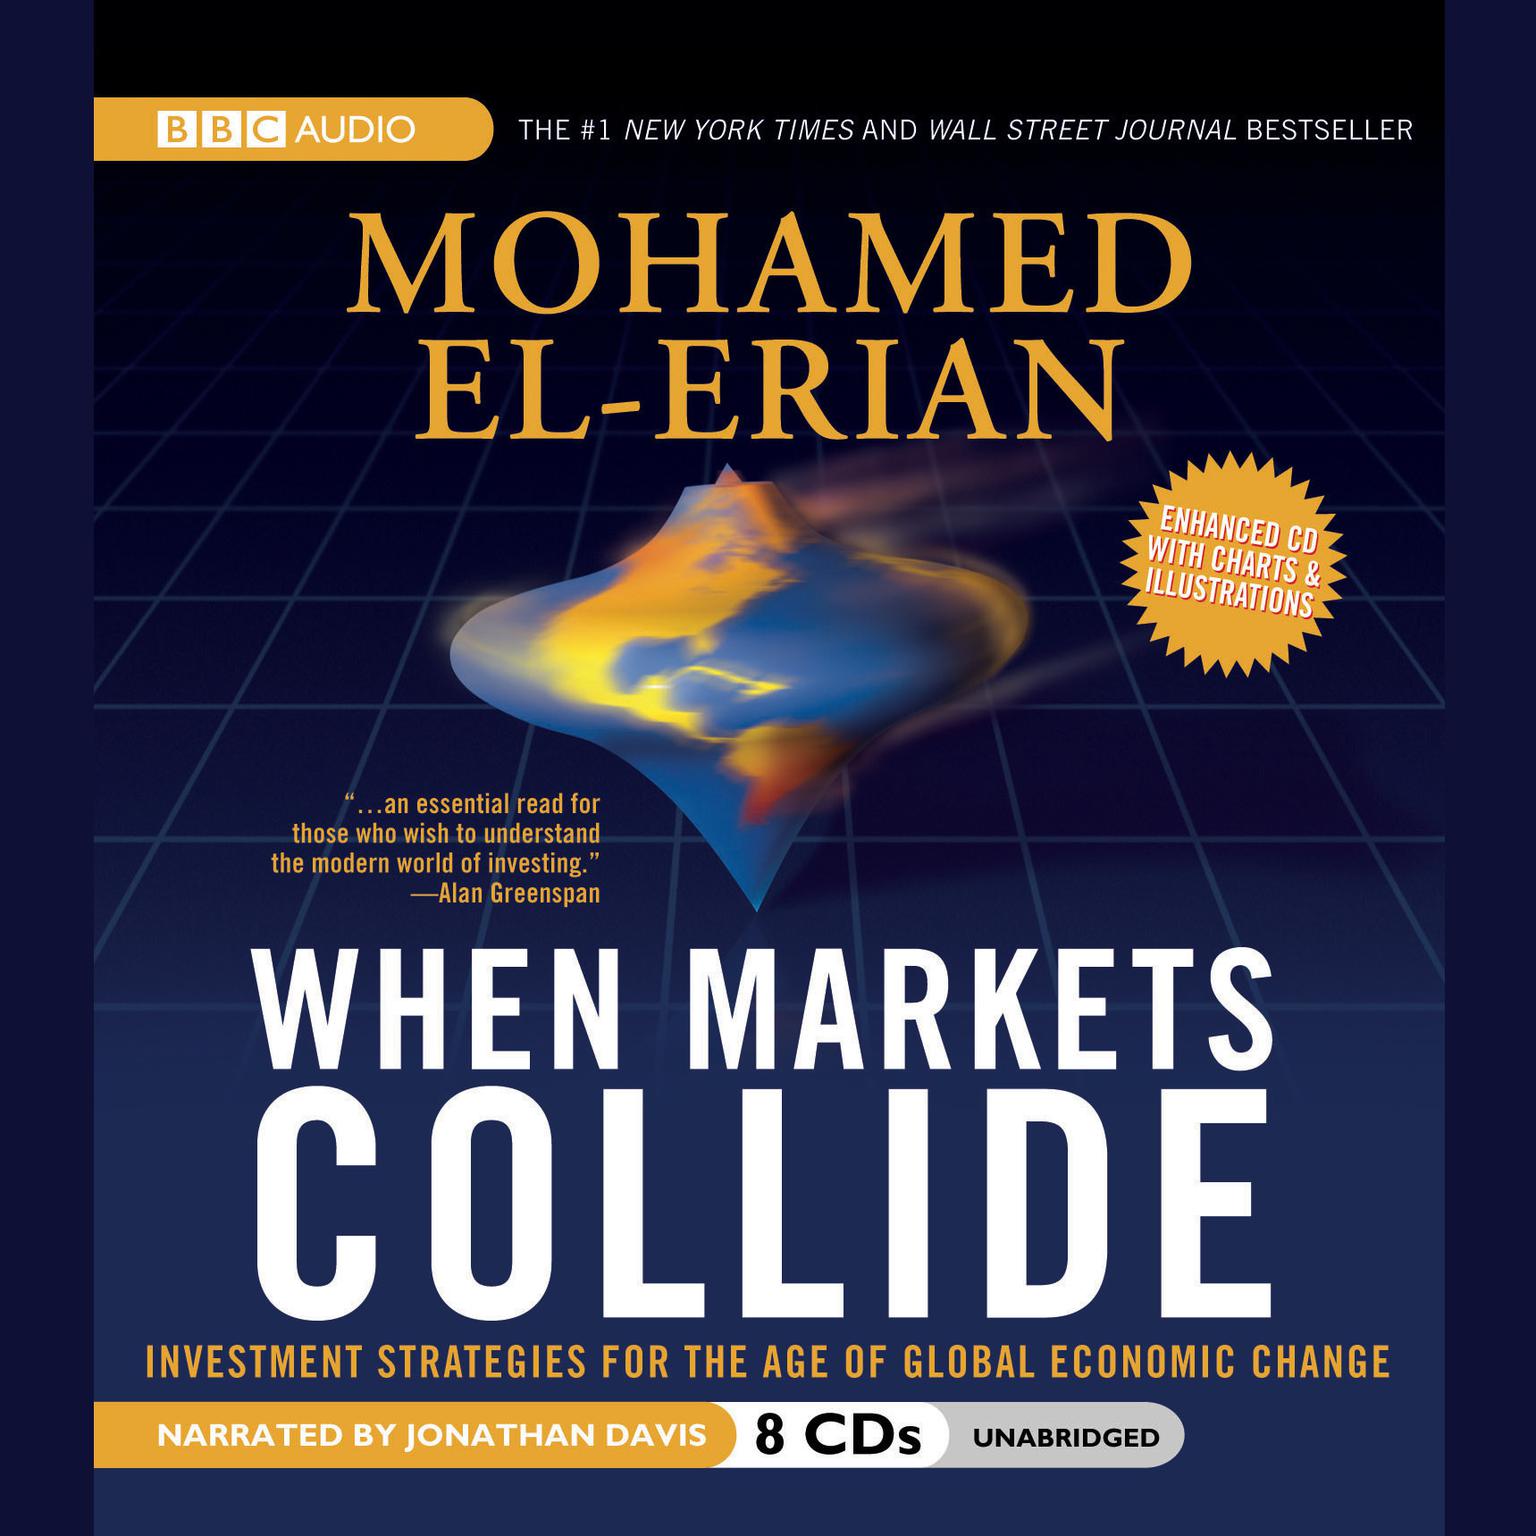 When Markets Collide: Investment Strategies for the Age of Global Economic Change Audiobook, by Mohamed El-Erian